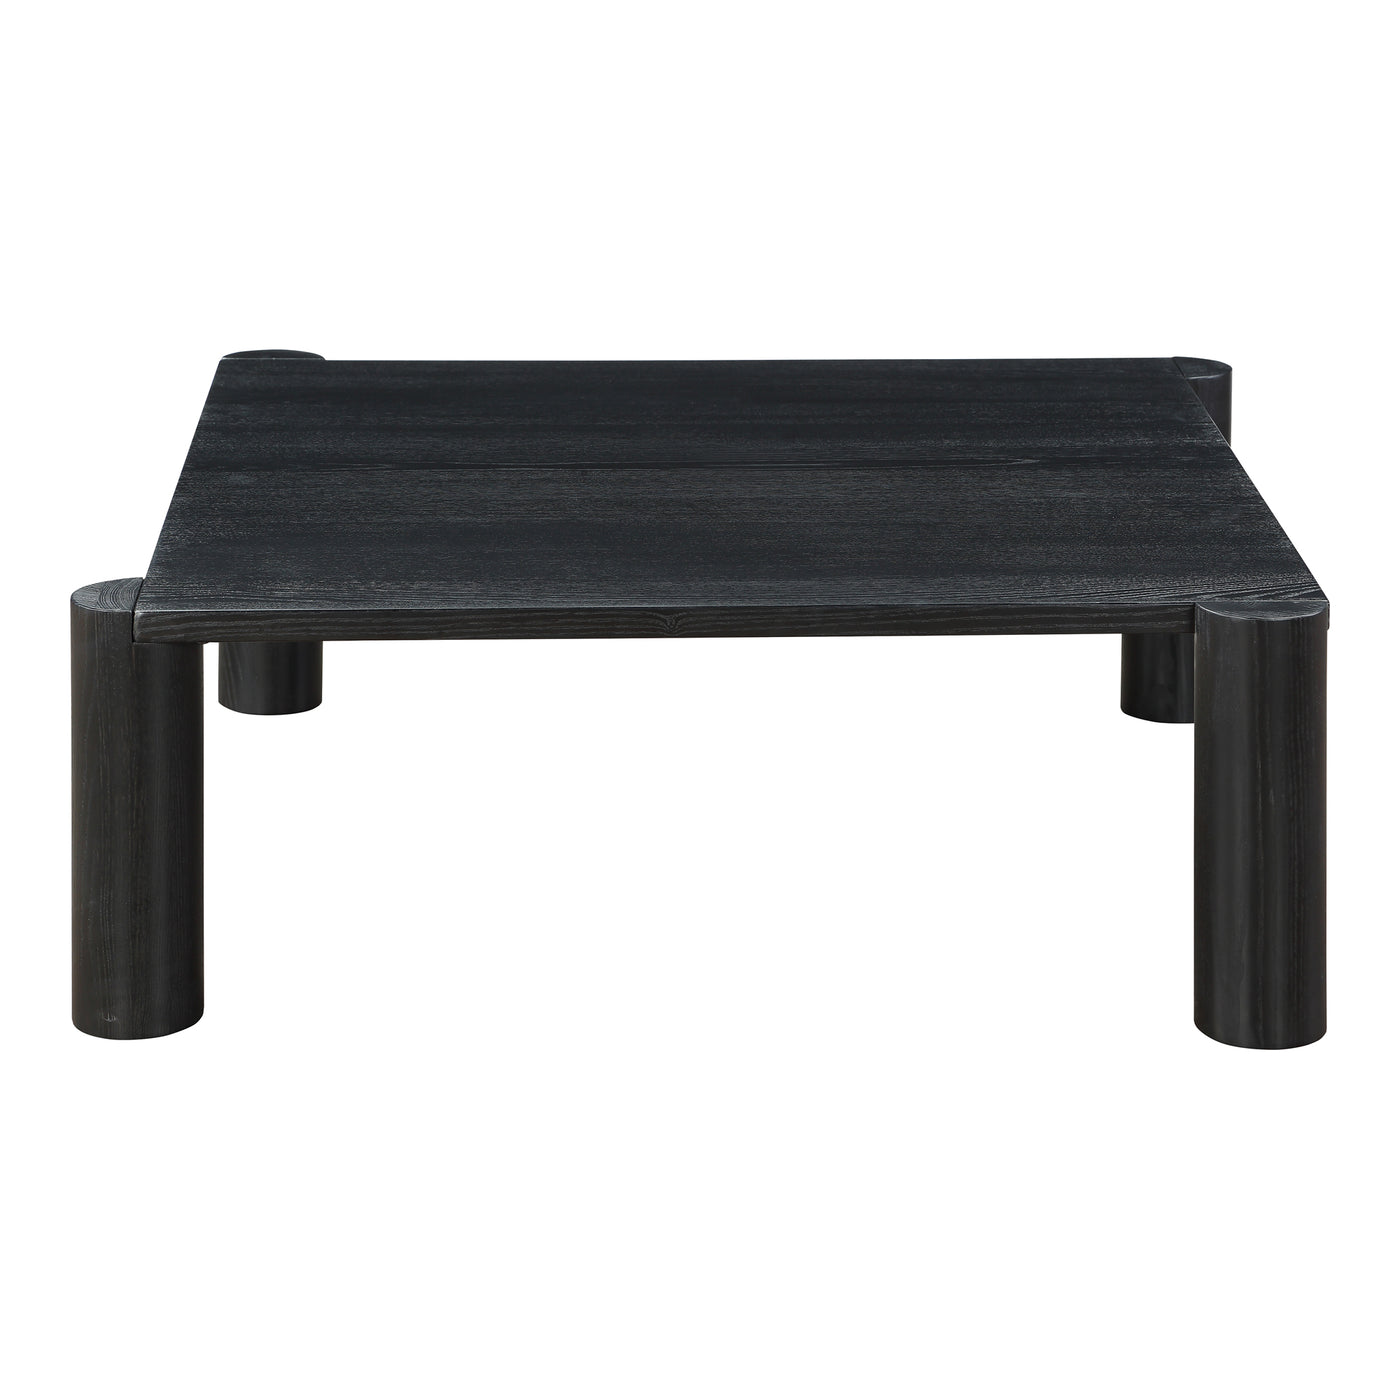 Isnt it great to have options? The Post coffee table leaves it up to you for its leg design. This sweet new table series ...